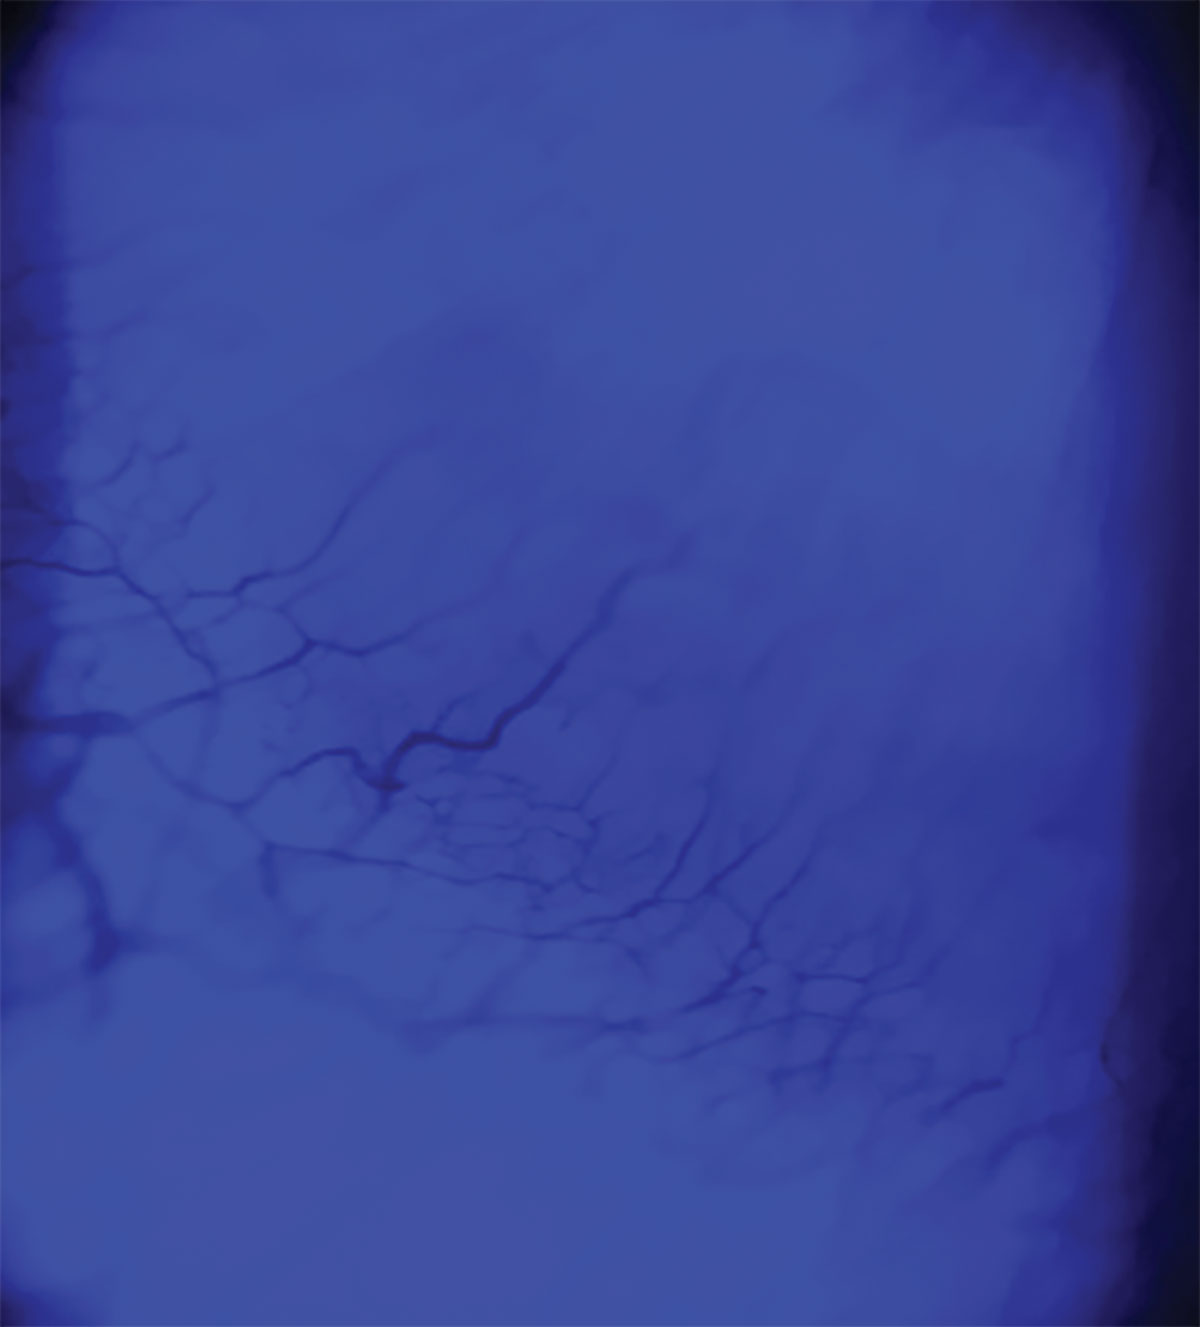 Fig. 3. Corneal neovascularization resulting from scleral lens extended wear visualized with cobalt light filter.